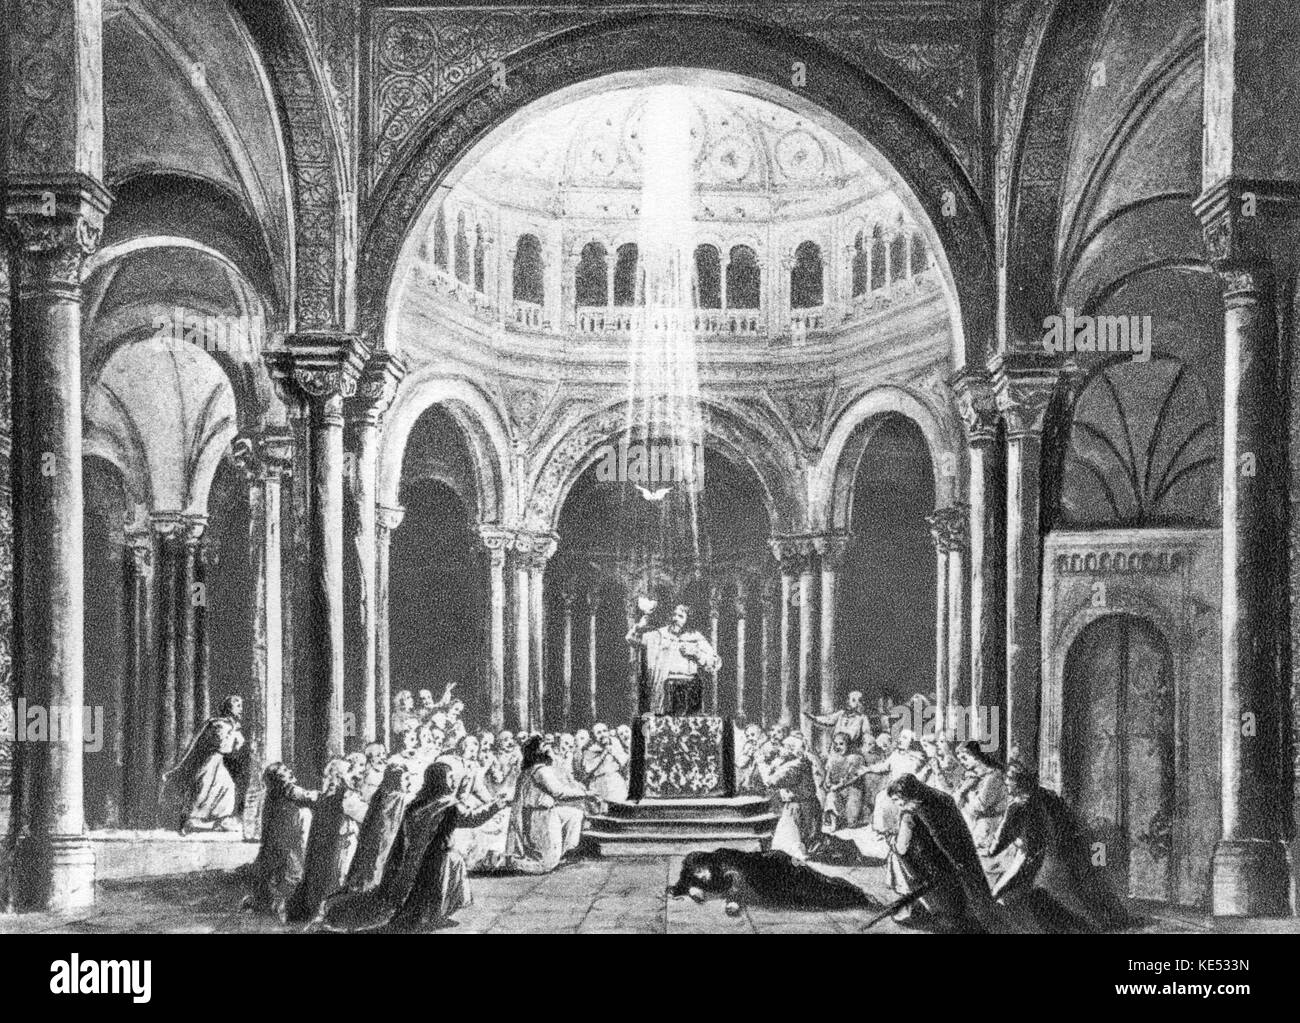 Richard Wagner 's opera Parsifal - scene depicting the Holy Grail. Original set design by Paul Joukowsky. RW: German composer, 22 May 1813 - 13 February 1883 Stock Photo